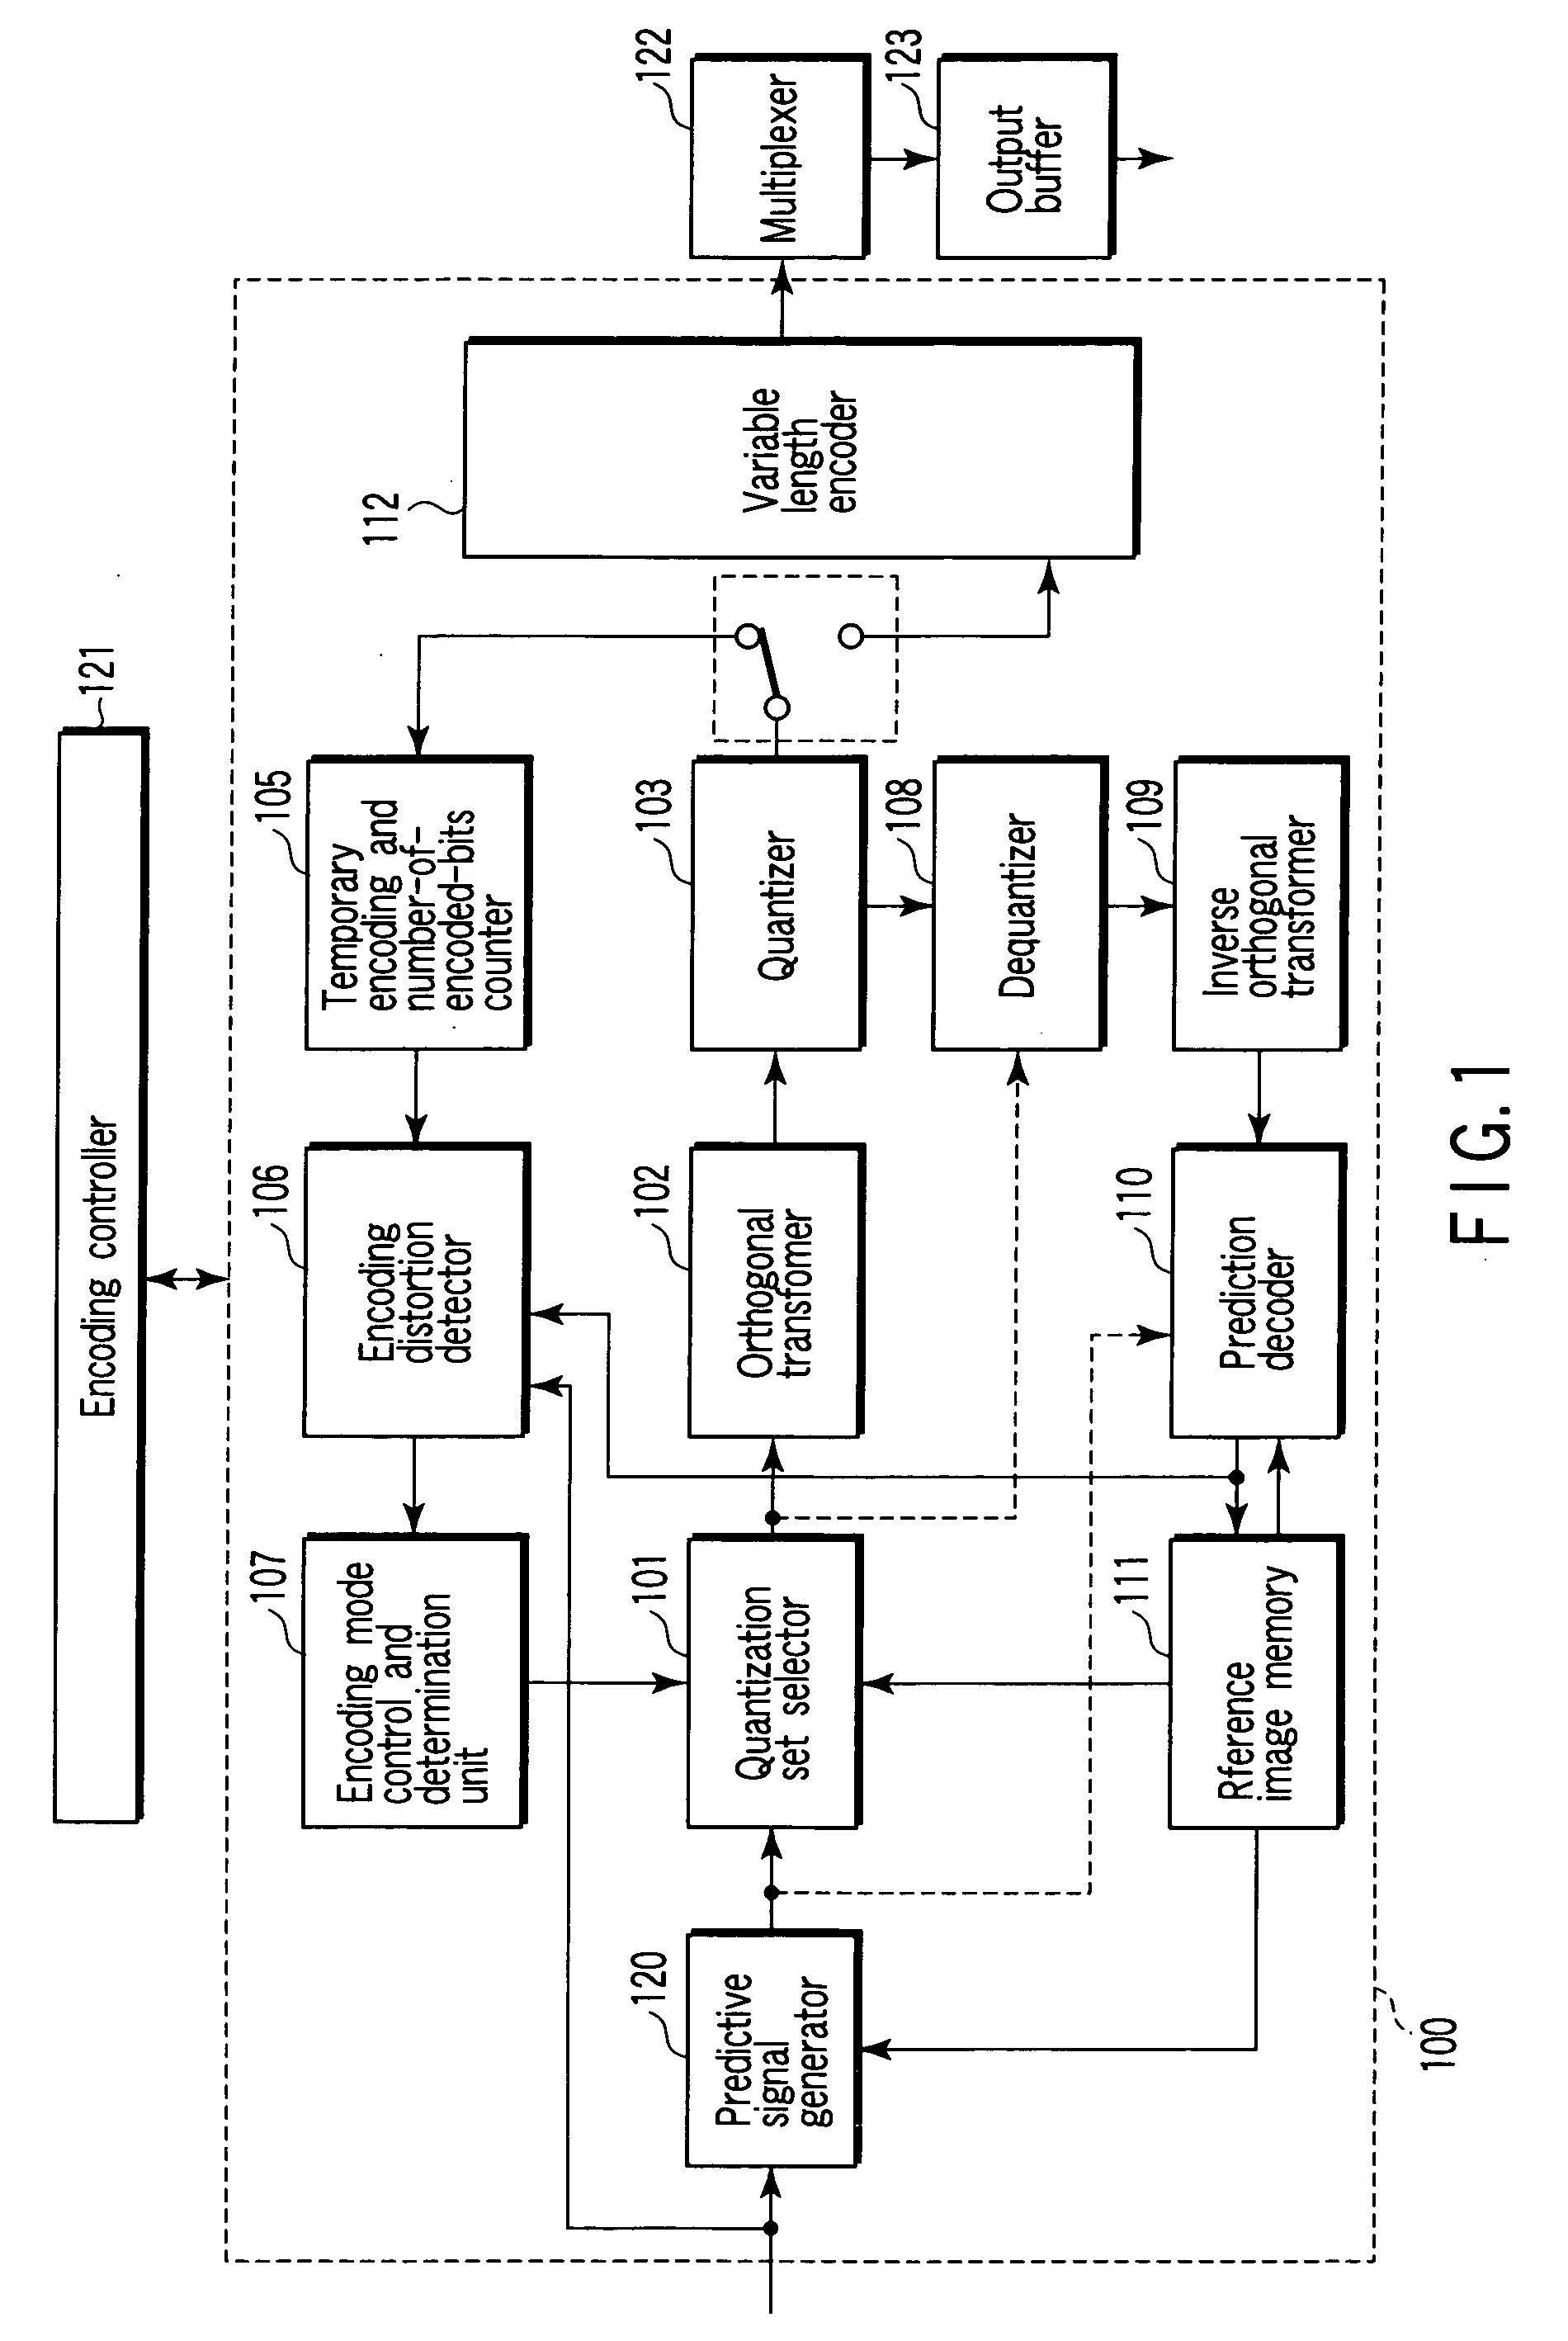 Image encoding/decoding method and apparatus therefor